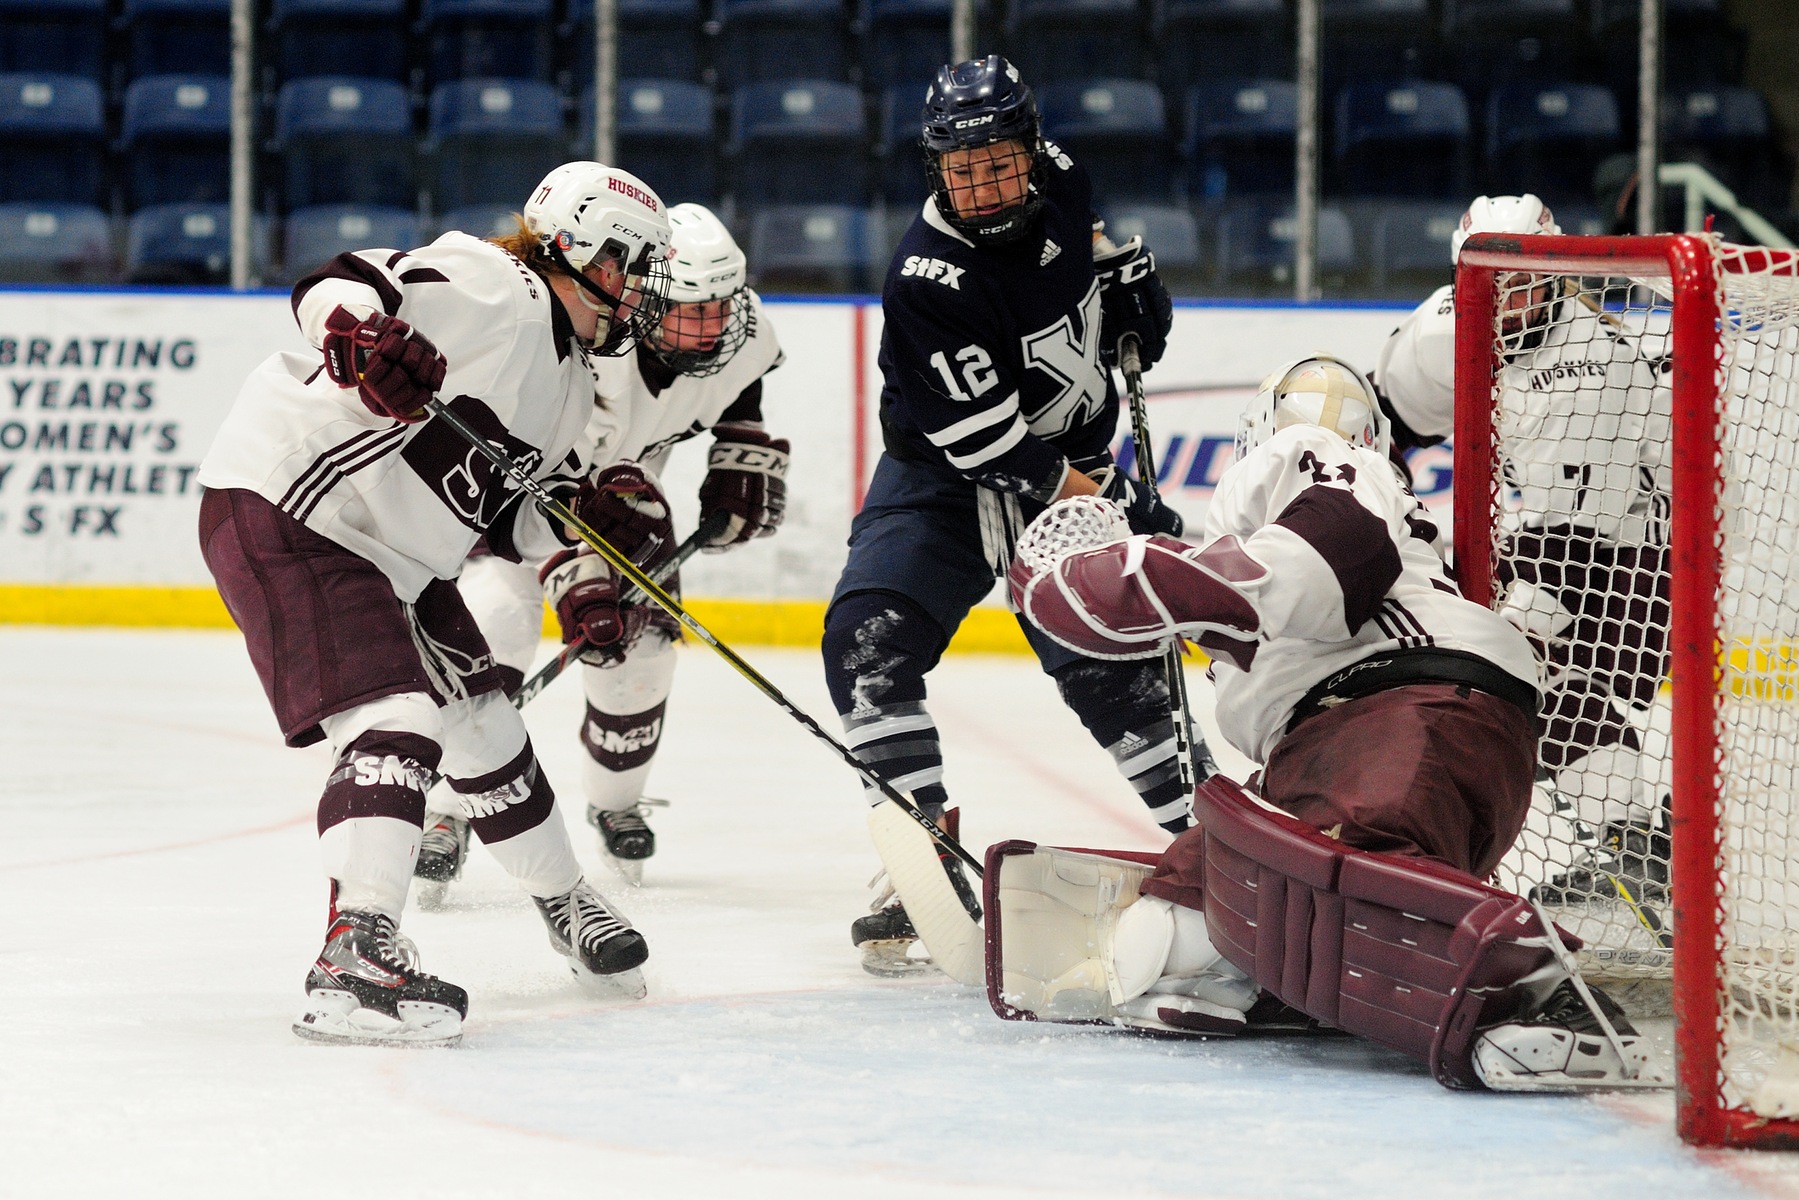 X-Women defeat Huskies 3-1 to share first place lead